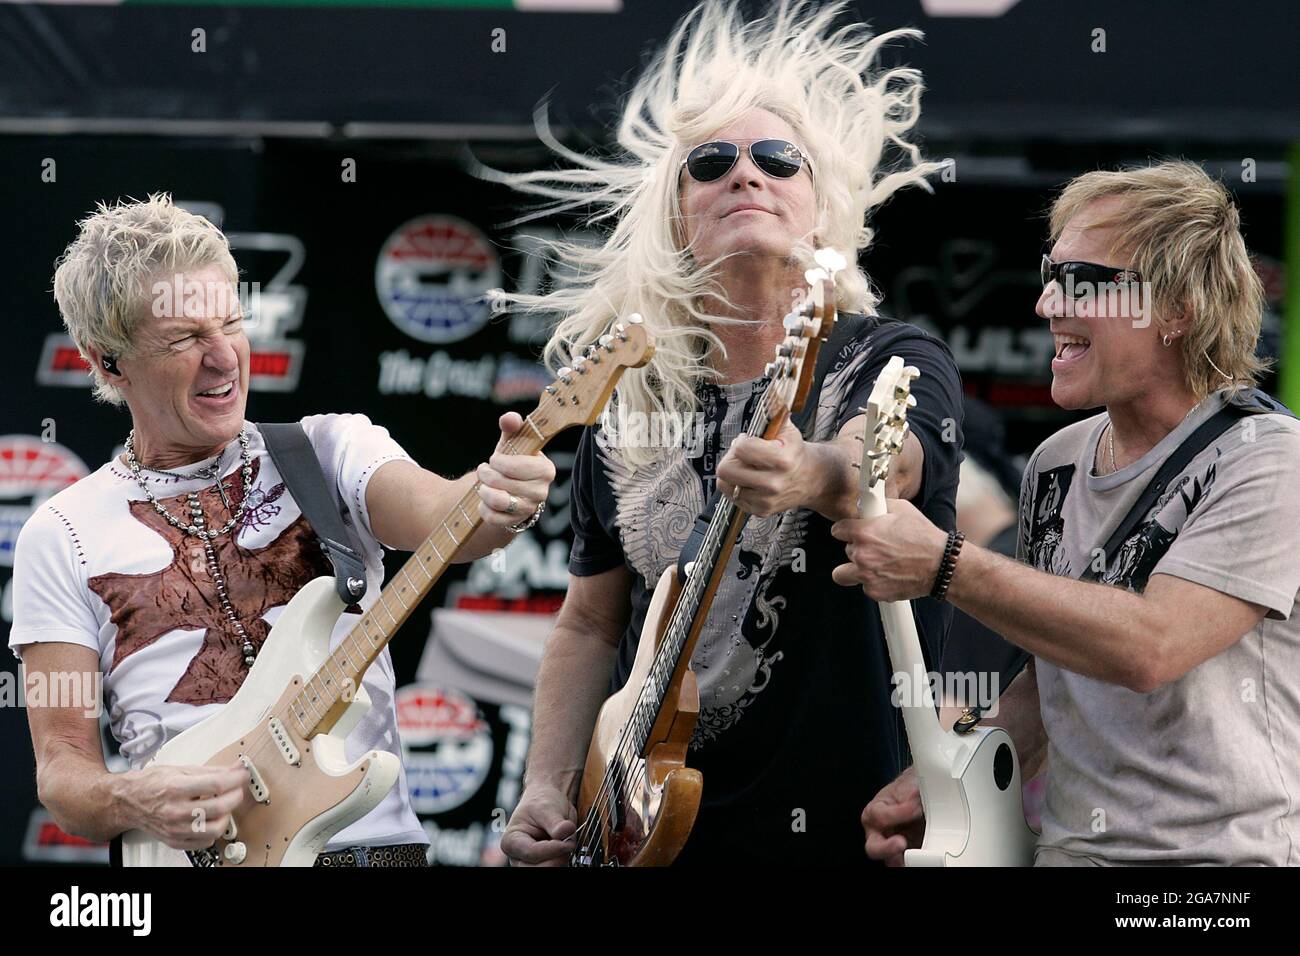 REO Speedwagon members, from left, Kevin Cronin, Bruce Hall, and Dave Amato perform before the start of the NASCAR Sprint Cup Dickies 500 on Sunday, Nov. 2, 2008, at Texas Motor Speedway in Fort Worth, Texas. (Photo by Ross Hailey/Fort Worth Star-Telegram/TNS/Sipa USA) Stock Photo